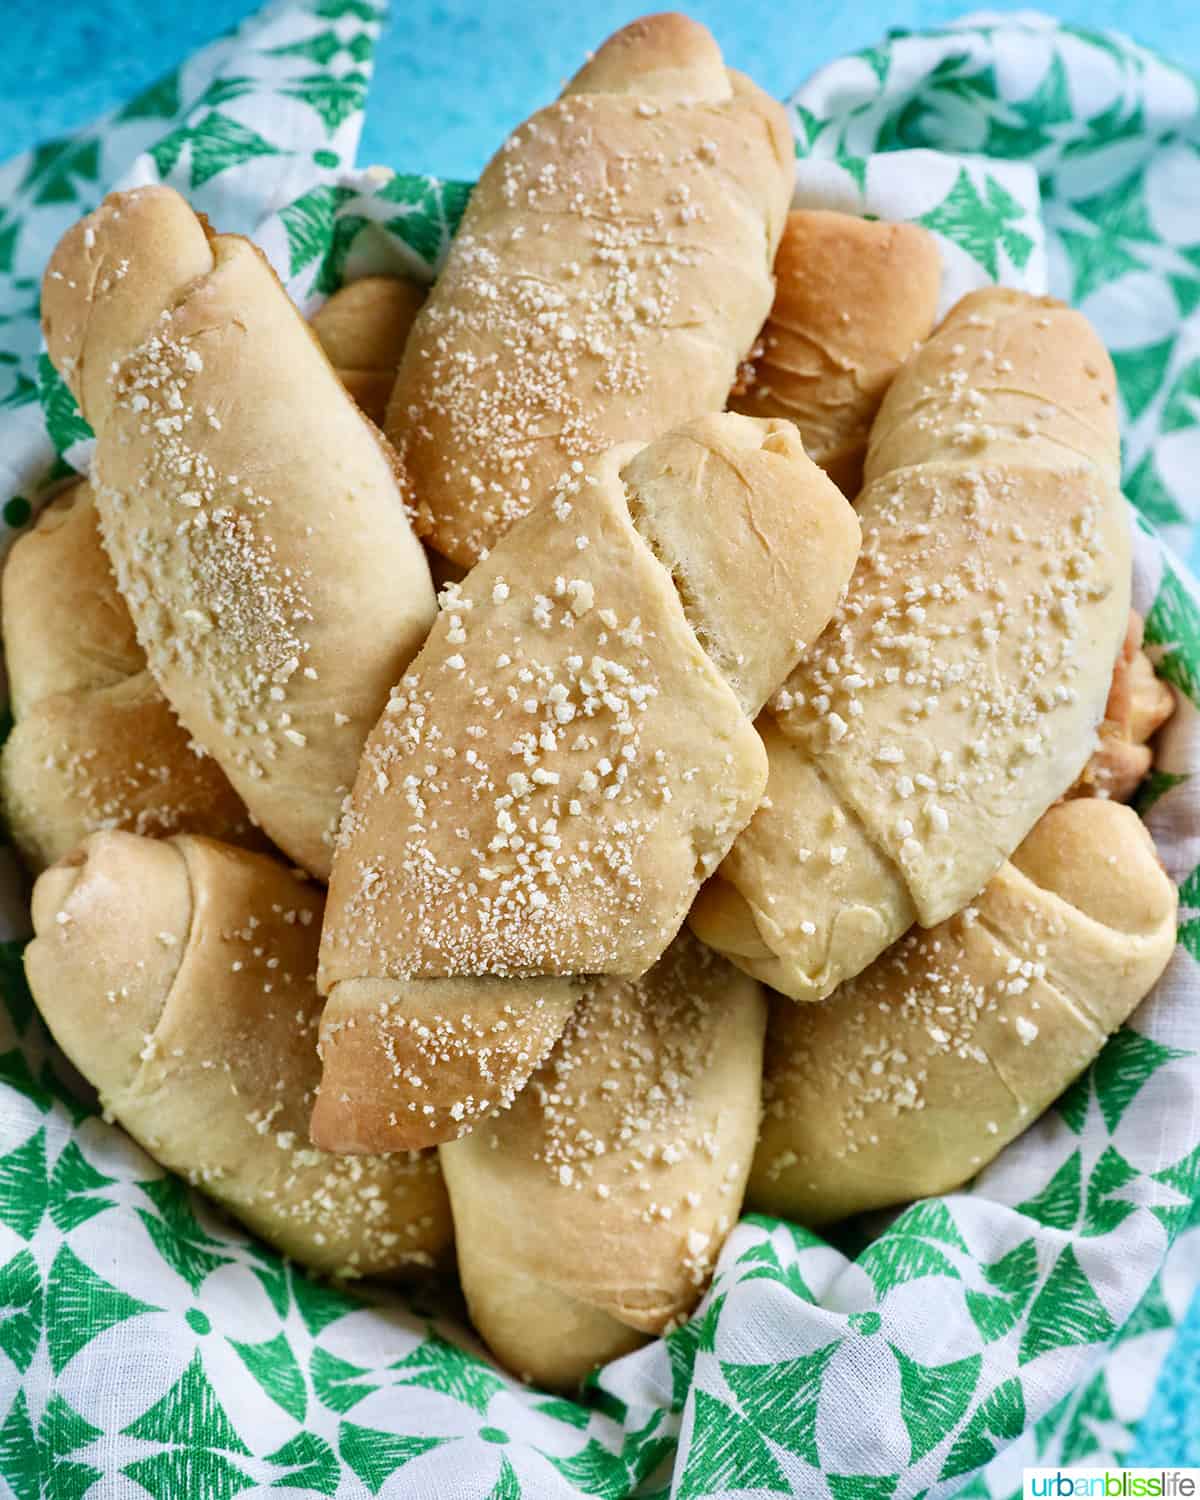 several freshly baked Filipino Spanish bread rolls with breadcrumbs on a green and white napkin.